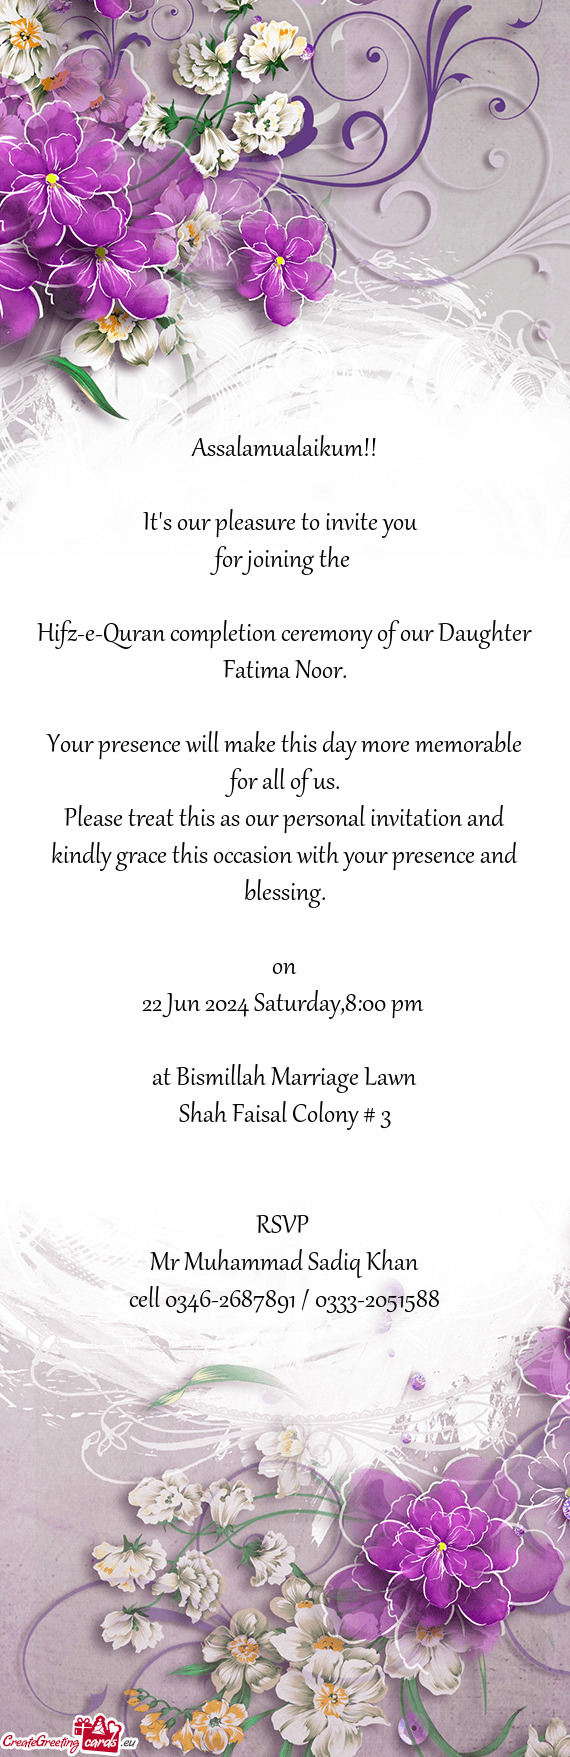 Hifz-e-Quran completion ceremony of our Daughter Fatima Noor